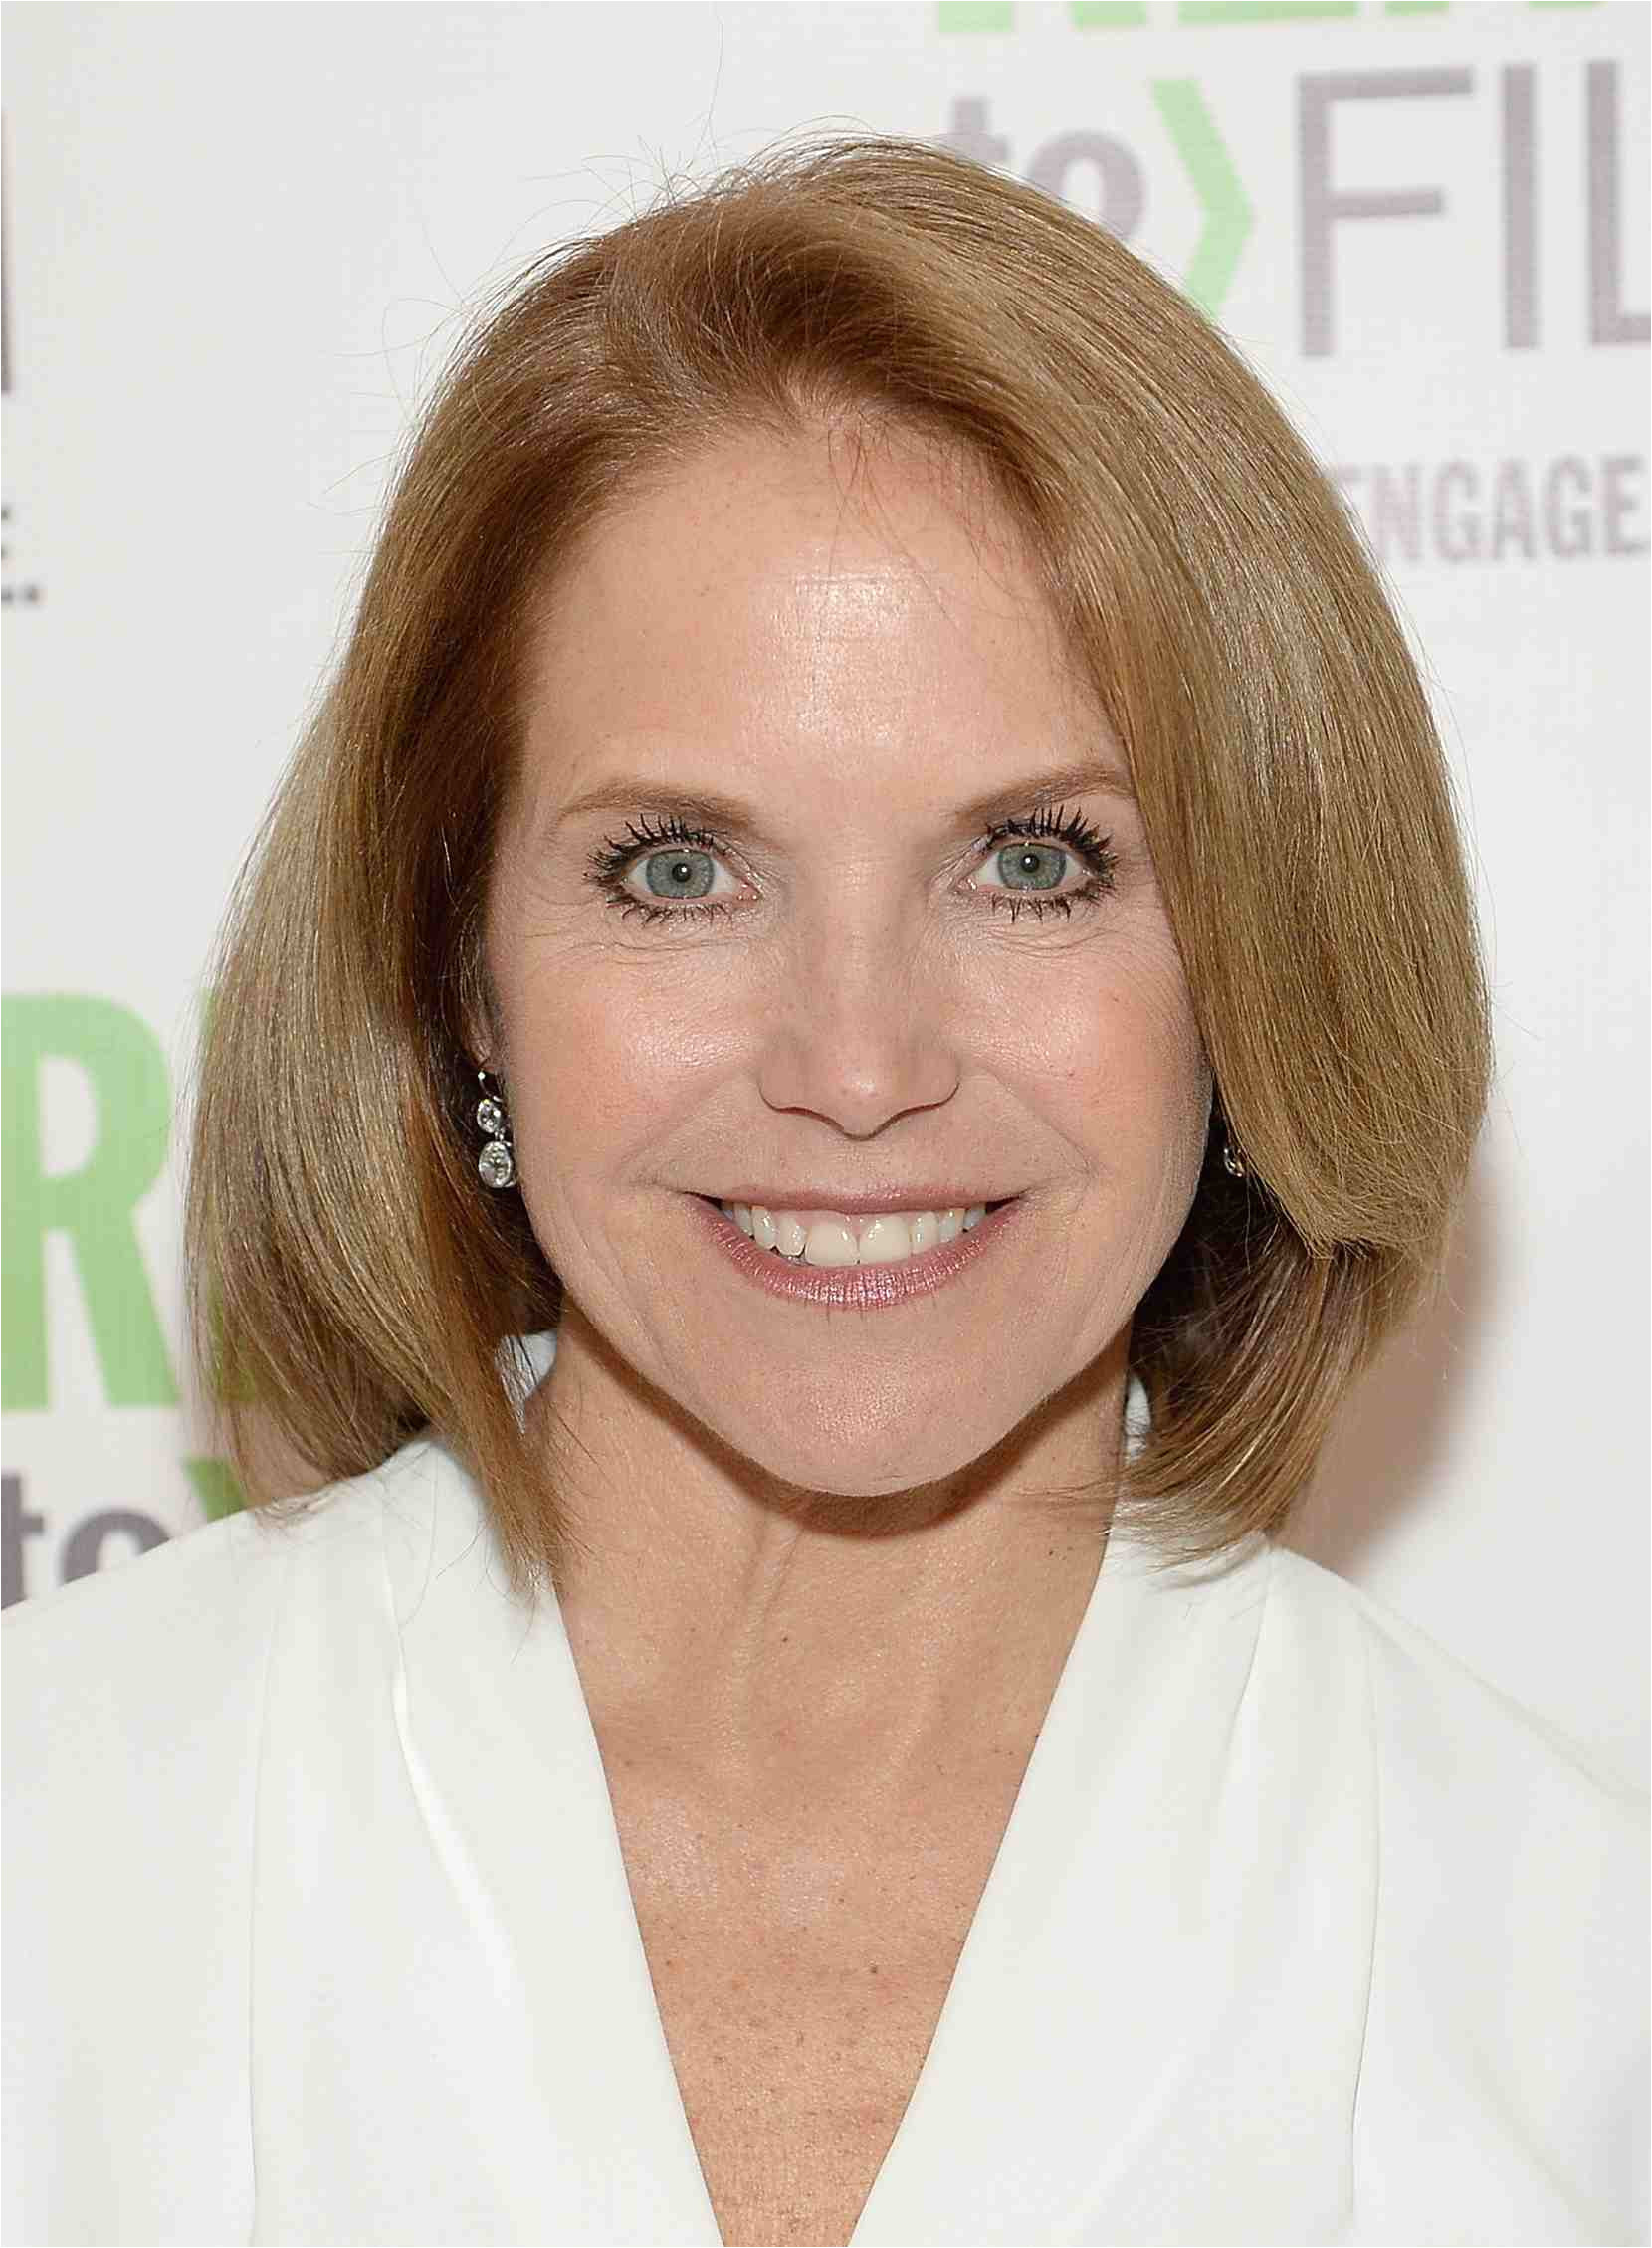 katie couric bob hairstyle 56a086c23df78cafdaa